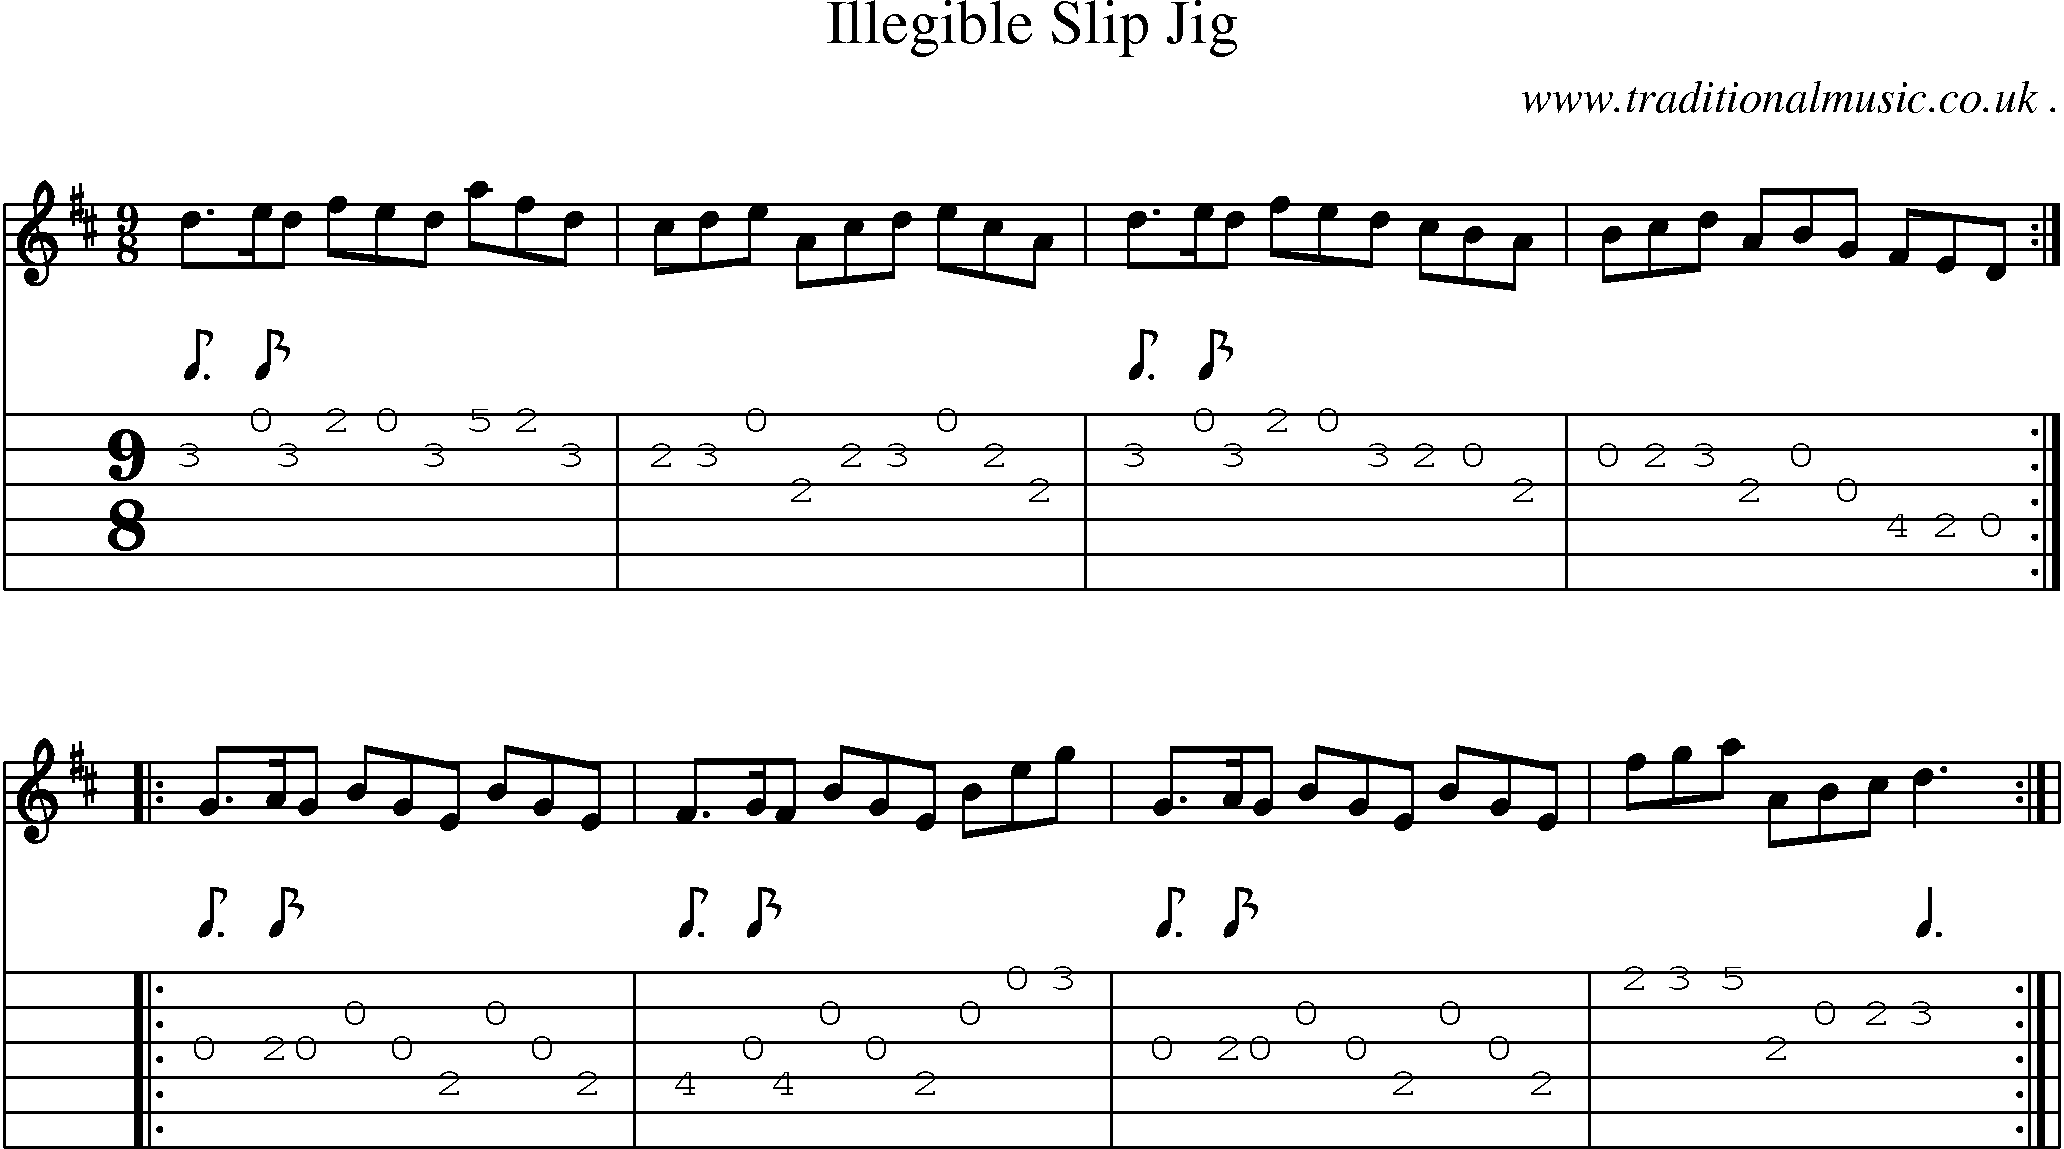 Sheet-Music and Guitar Tabs for Illegible Slip Jig